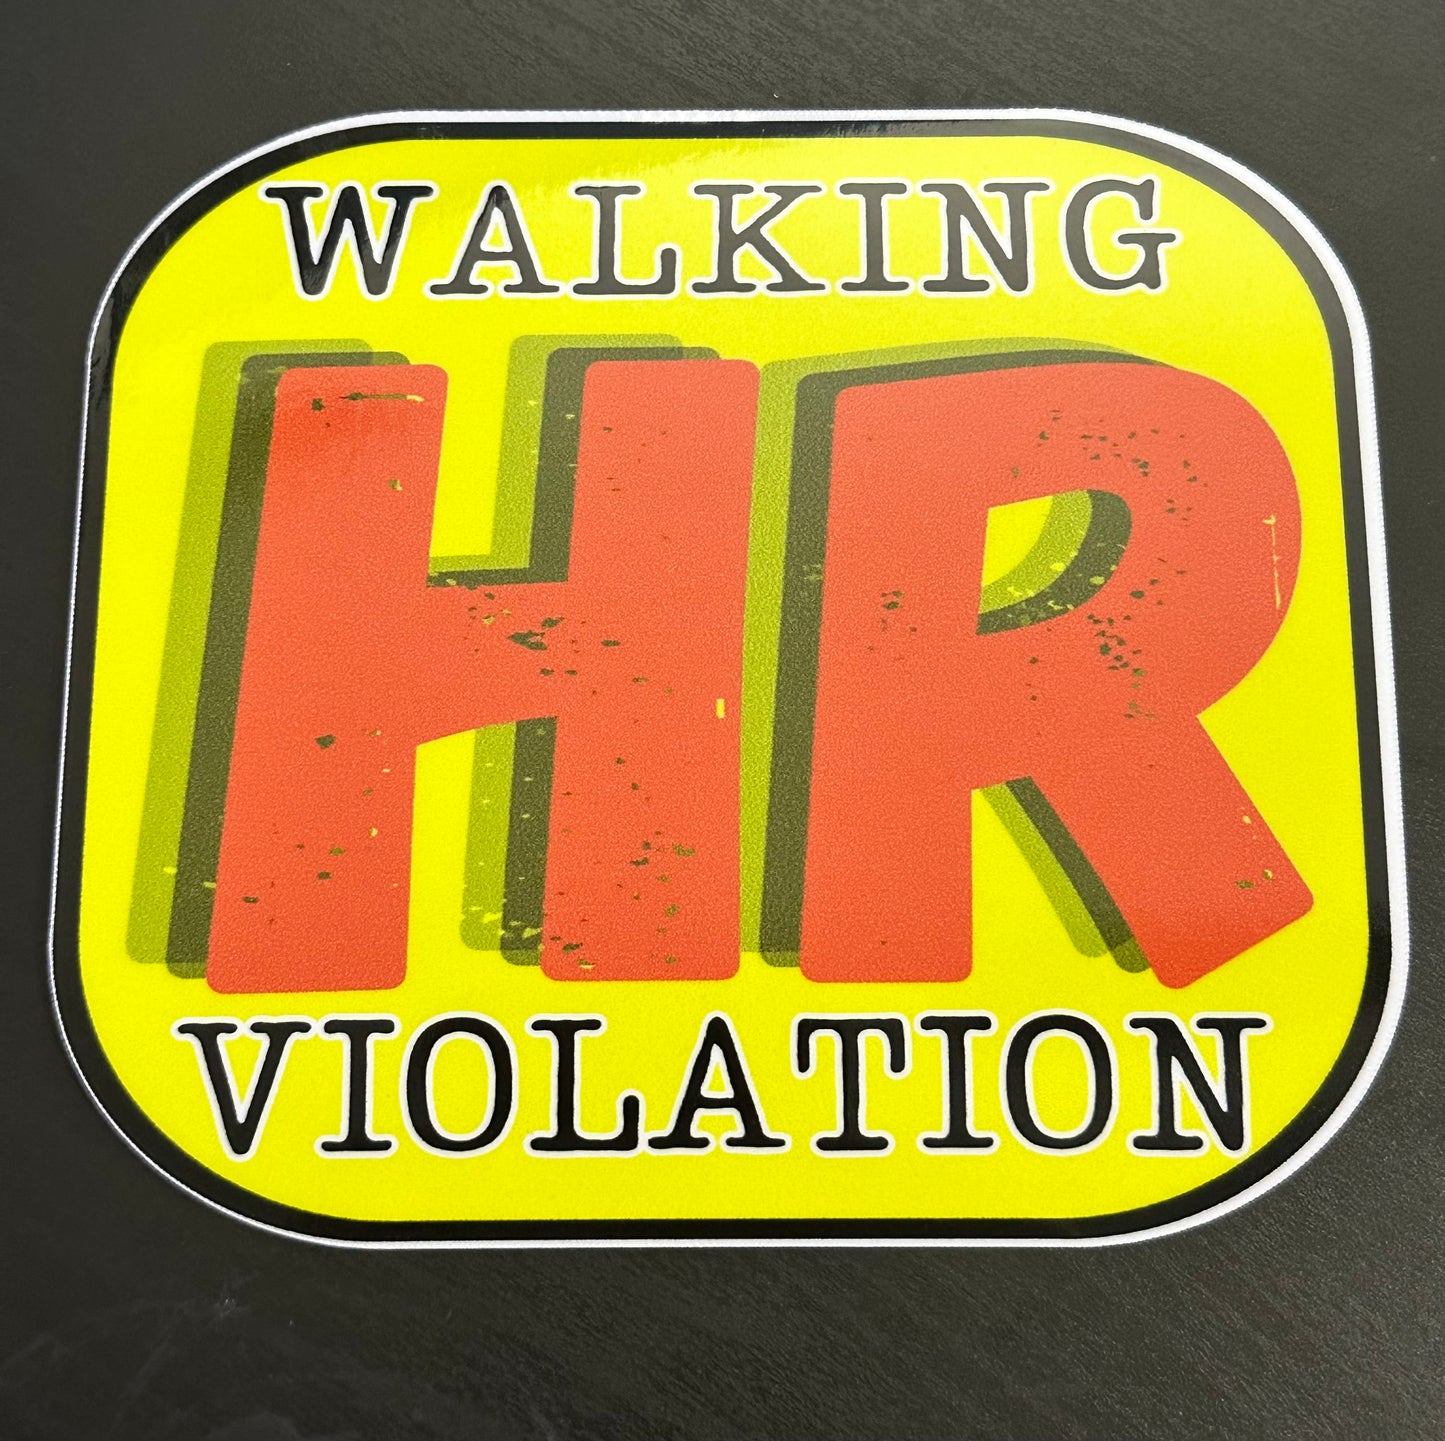 Walking HR Violation Decal 5x4 inches